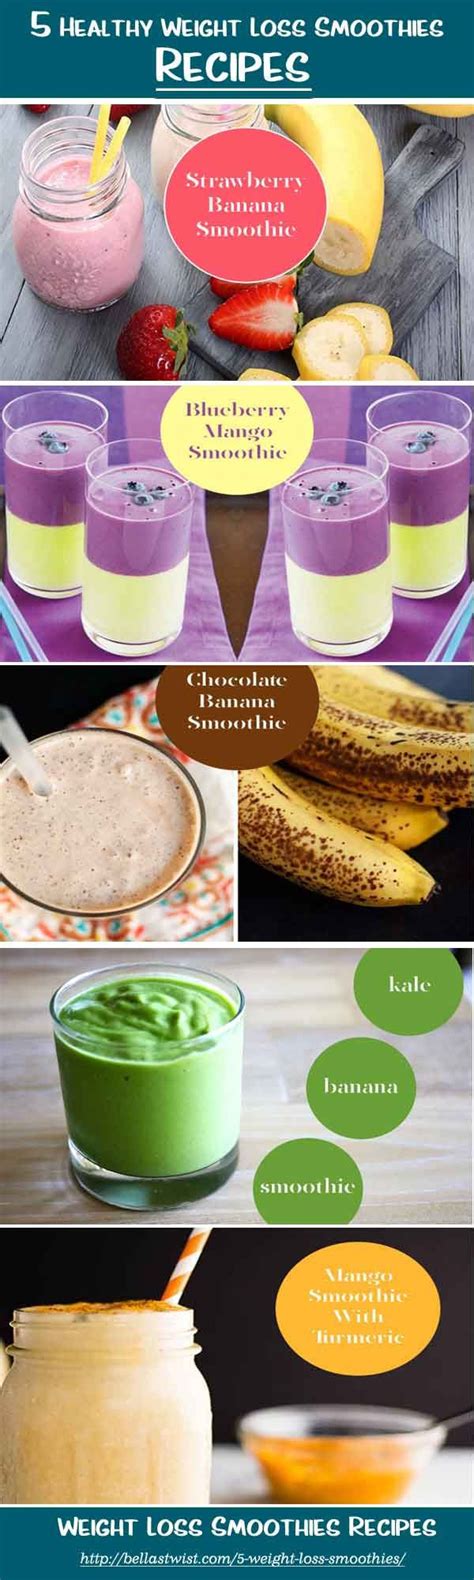 Best 25 diabetic smoothies ideas on pinterest. The Best Diabetic Smoothies to Lose Weight - Best Diet and ...